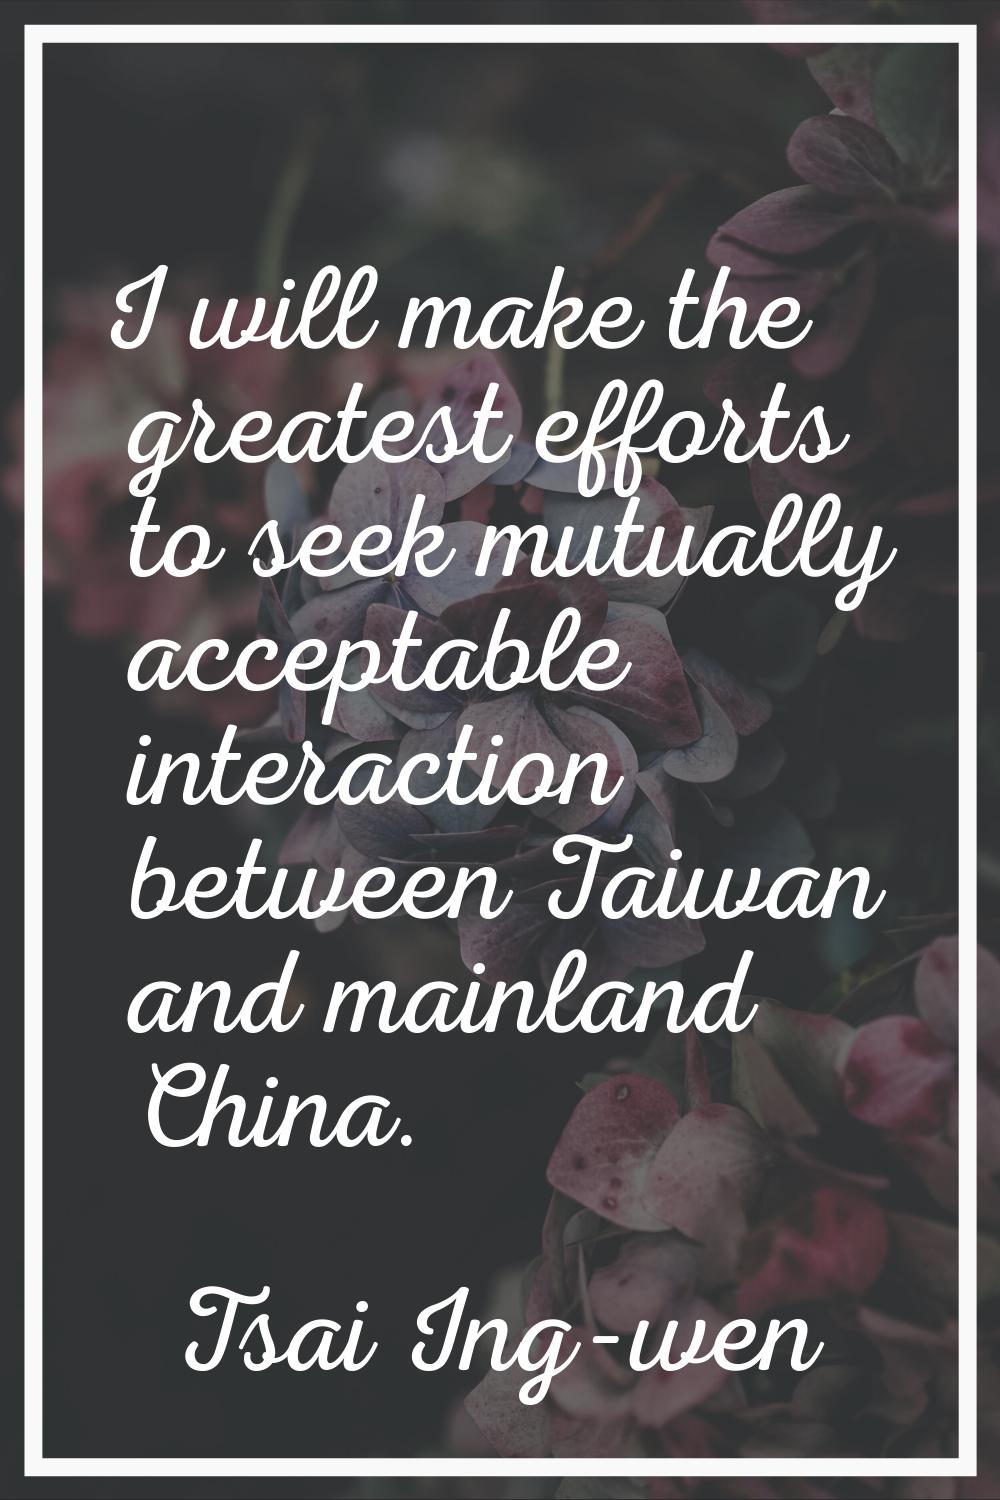 I will make the greatest efforts to seek mutually acceptable interaction between Taiwan and mainlan